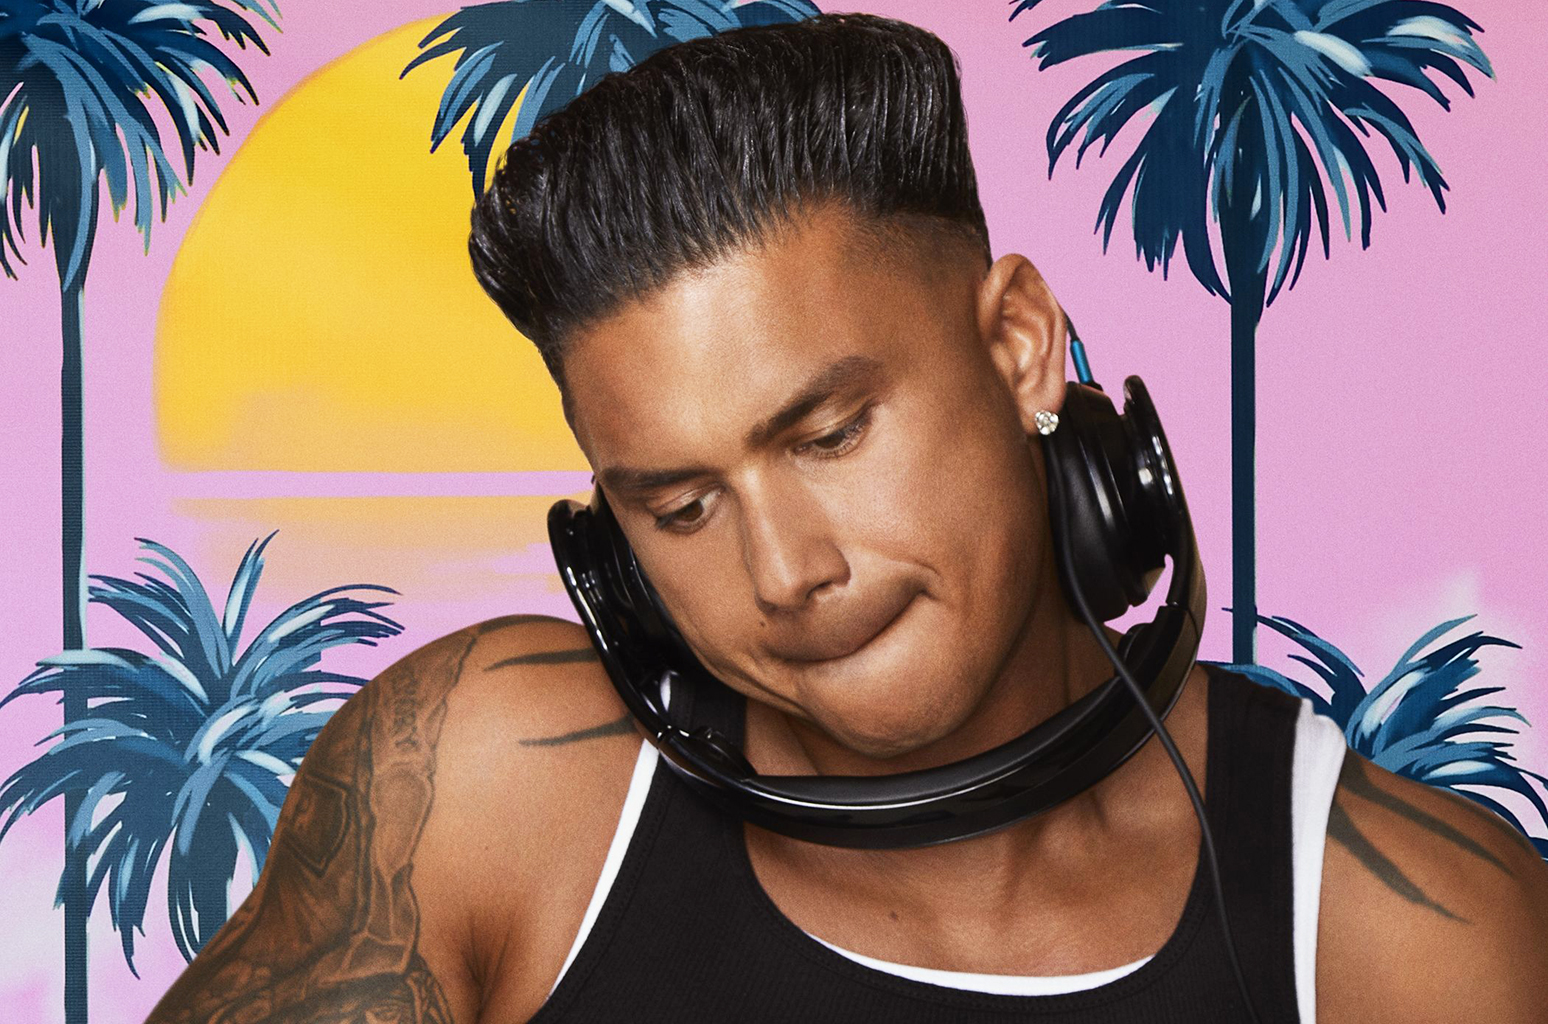 mtv greenlights "double shot at love with dj pauly d & vinny"...